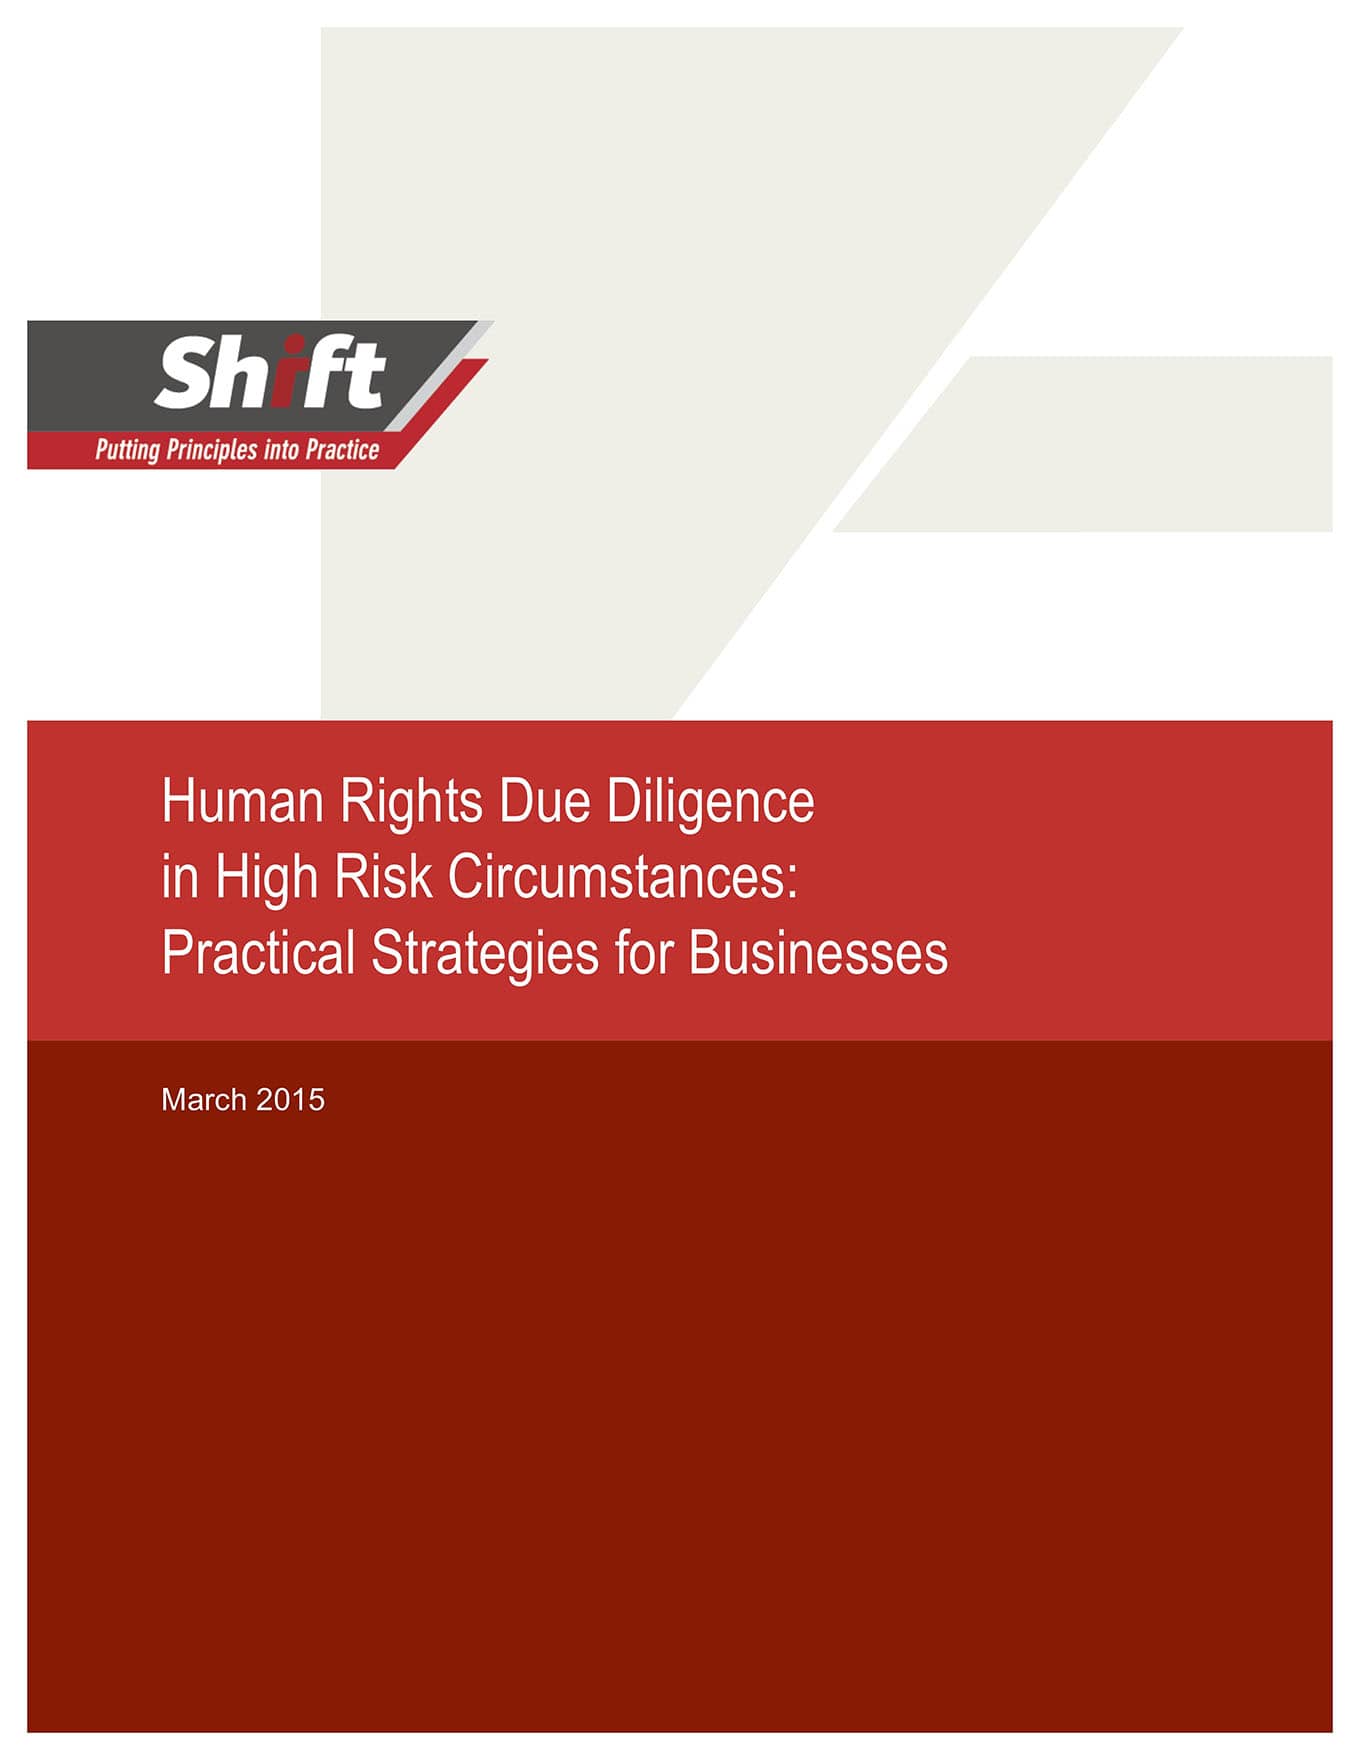 Human Rights Due Diligence in High Risk Circumstances: Practical Strategies for Businesses (Shift, 2015)